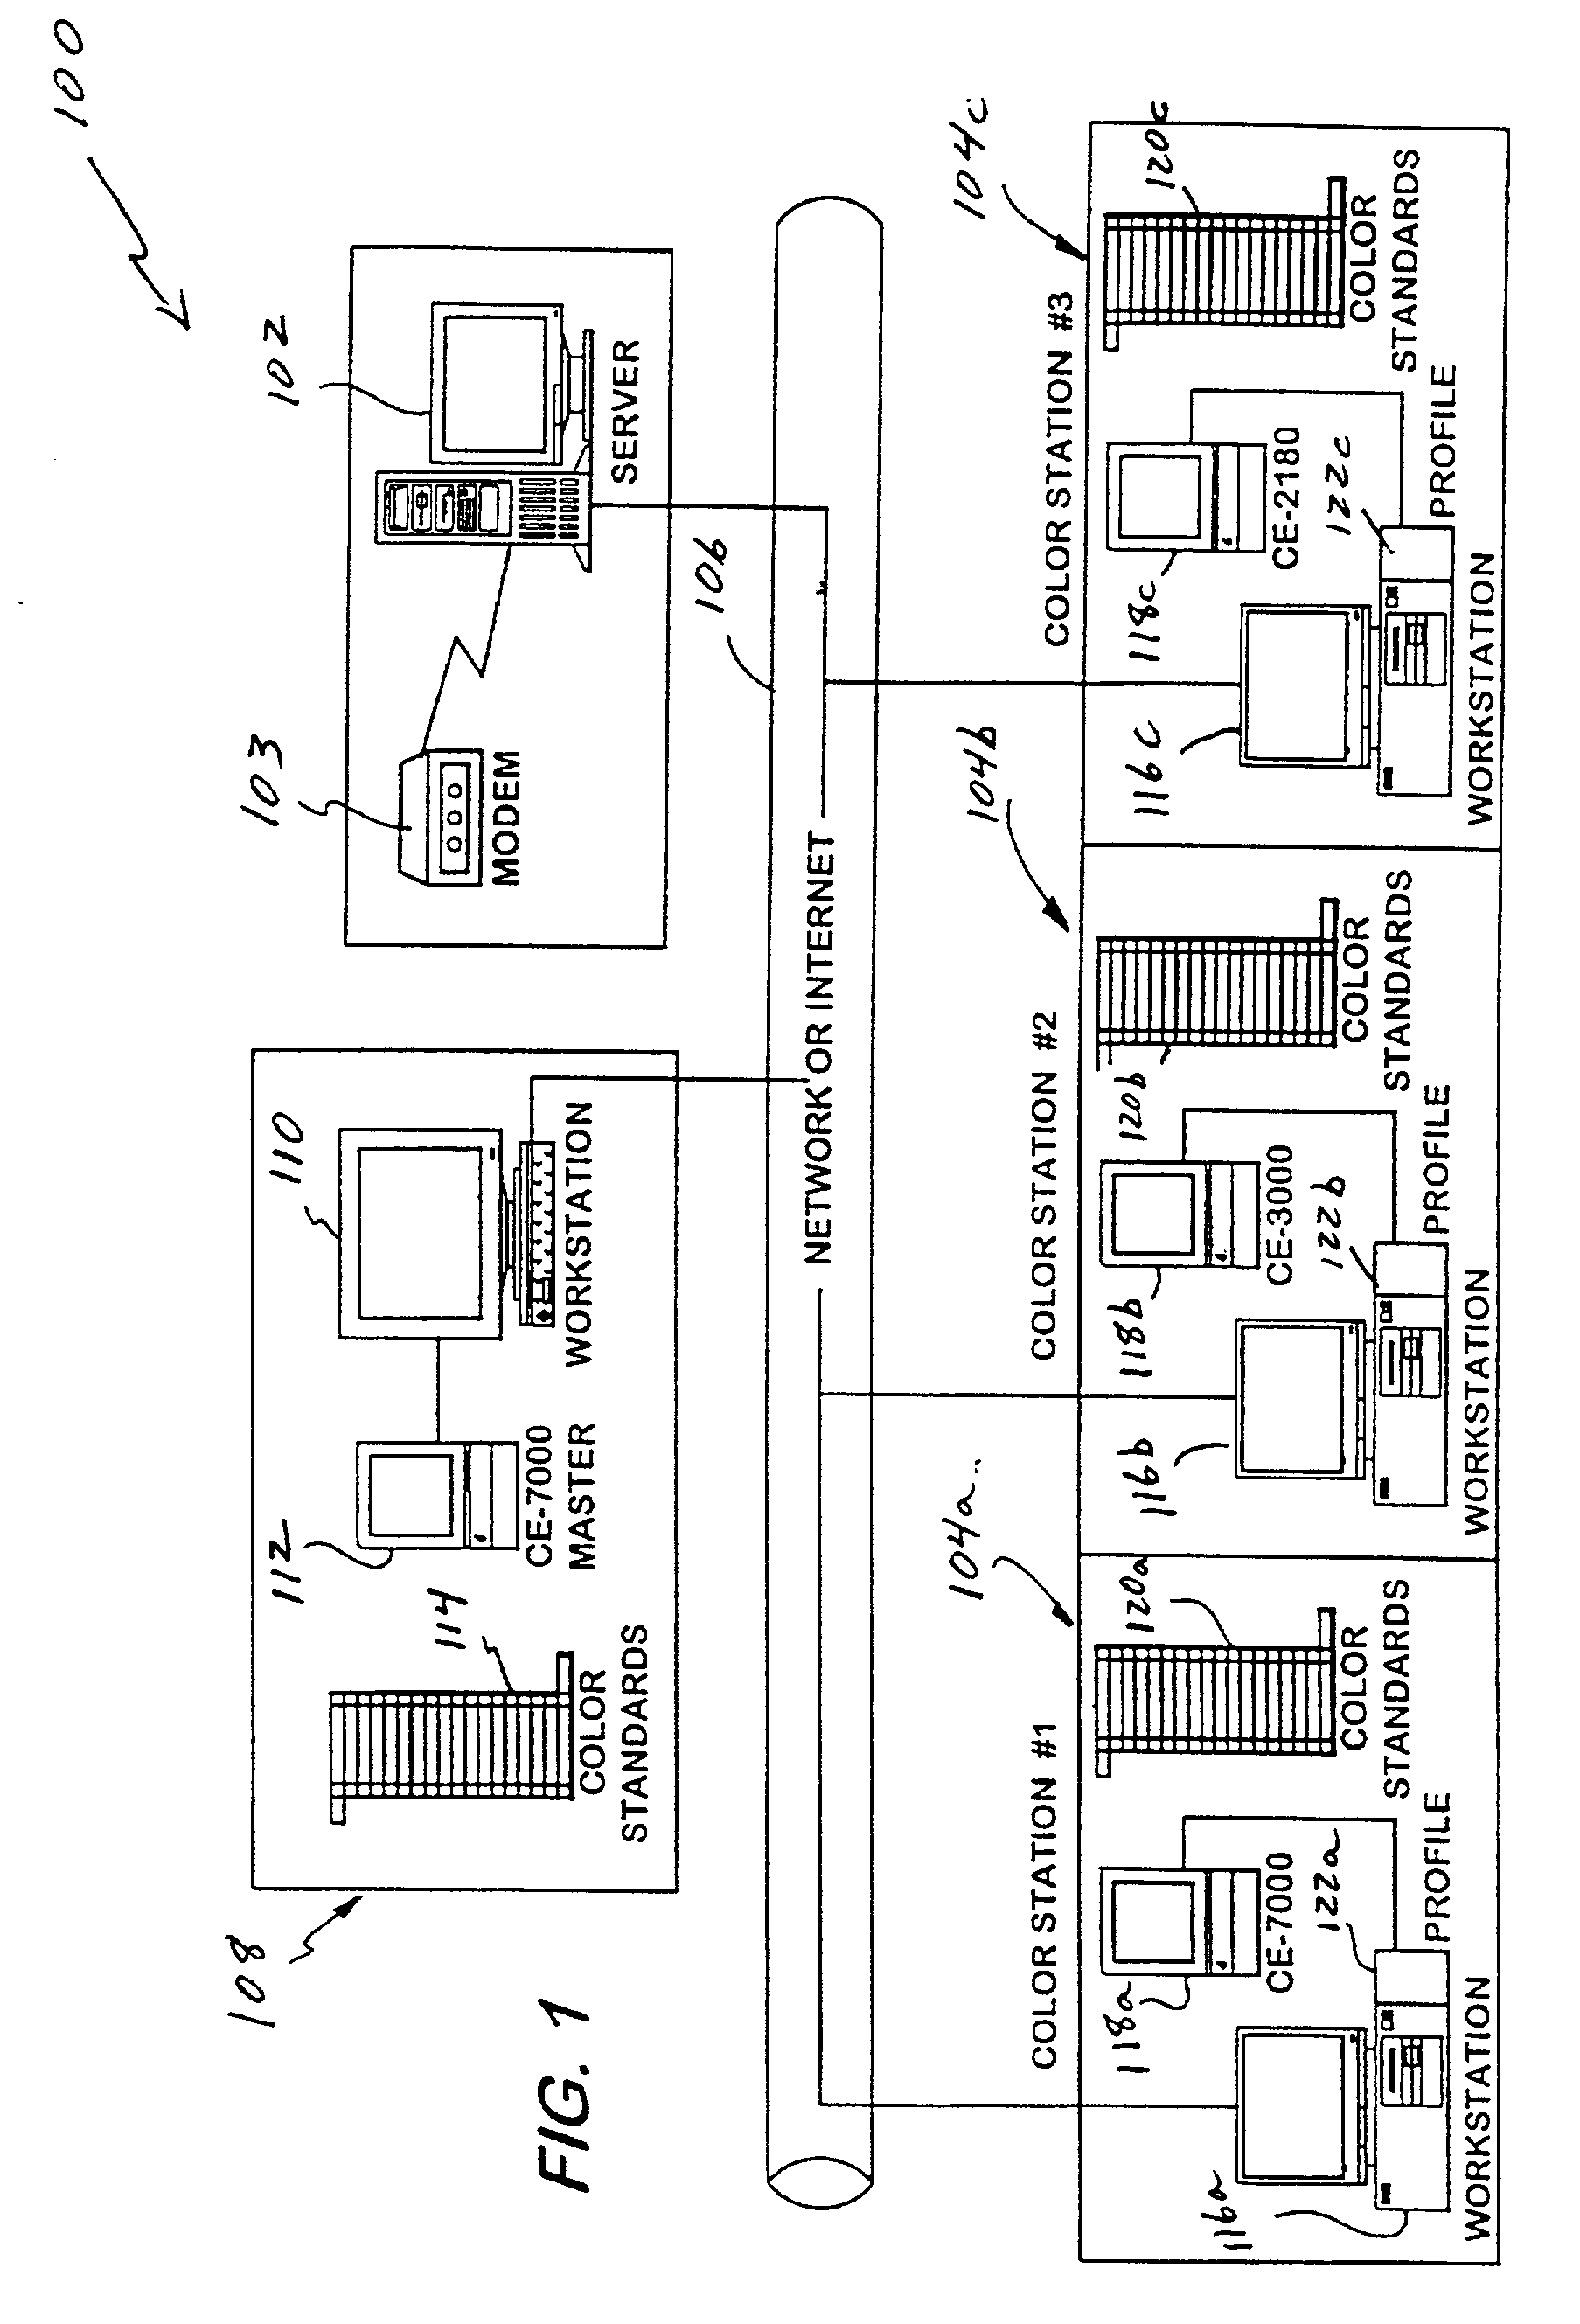 System and method for facilitating specifier and supplier communications